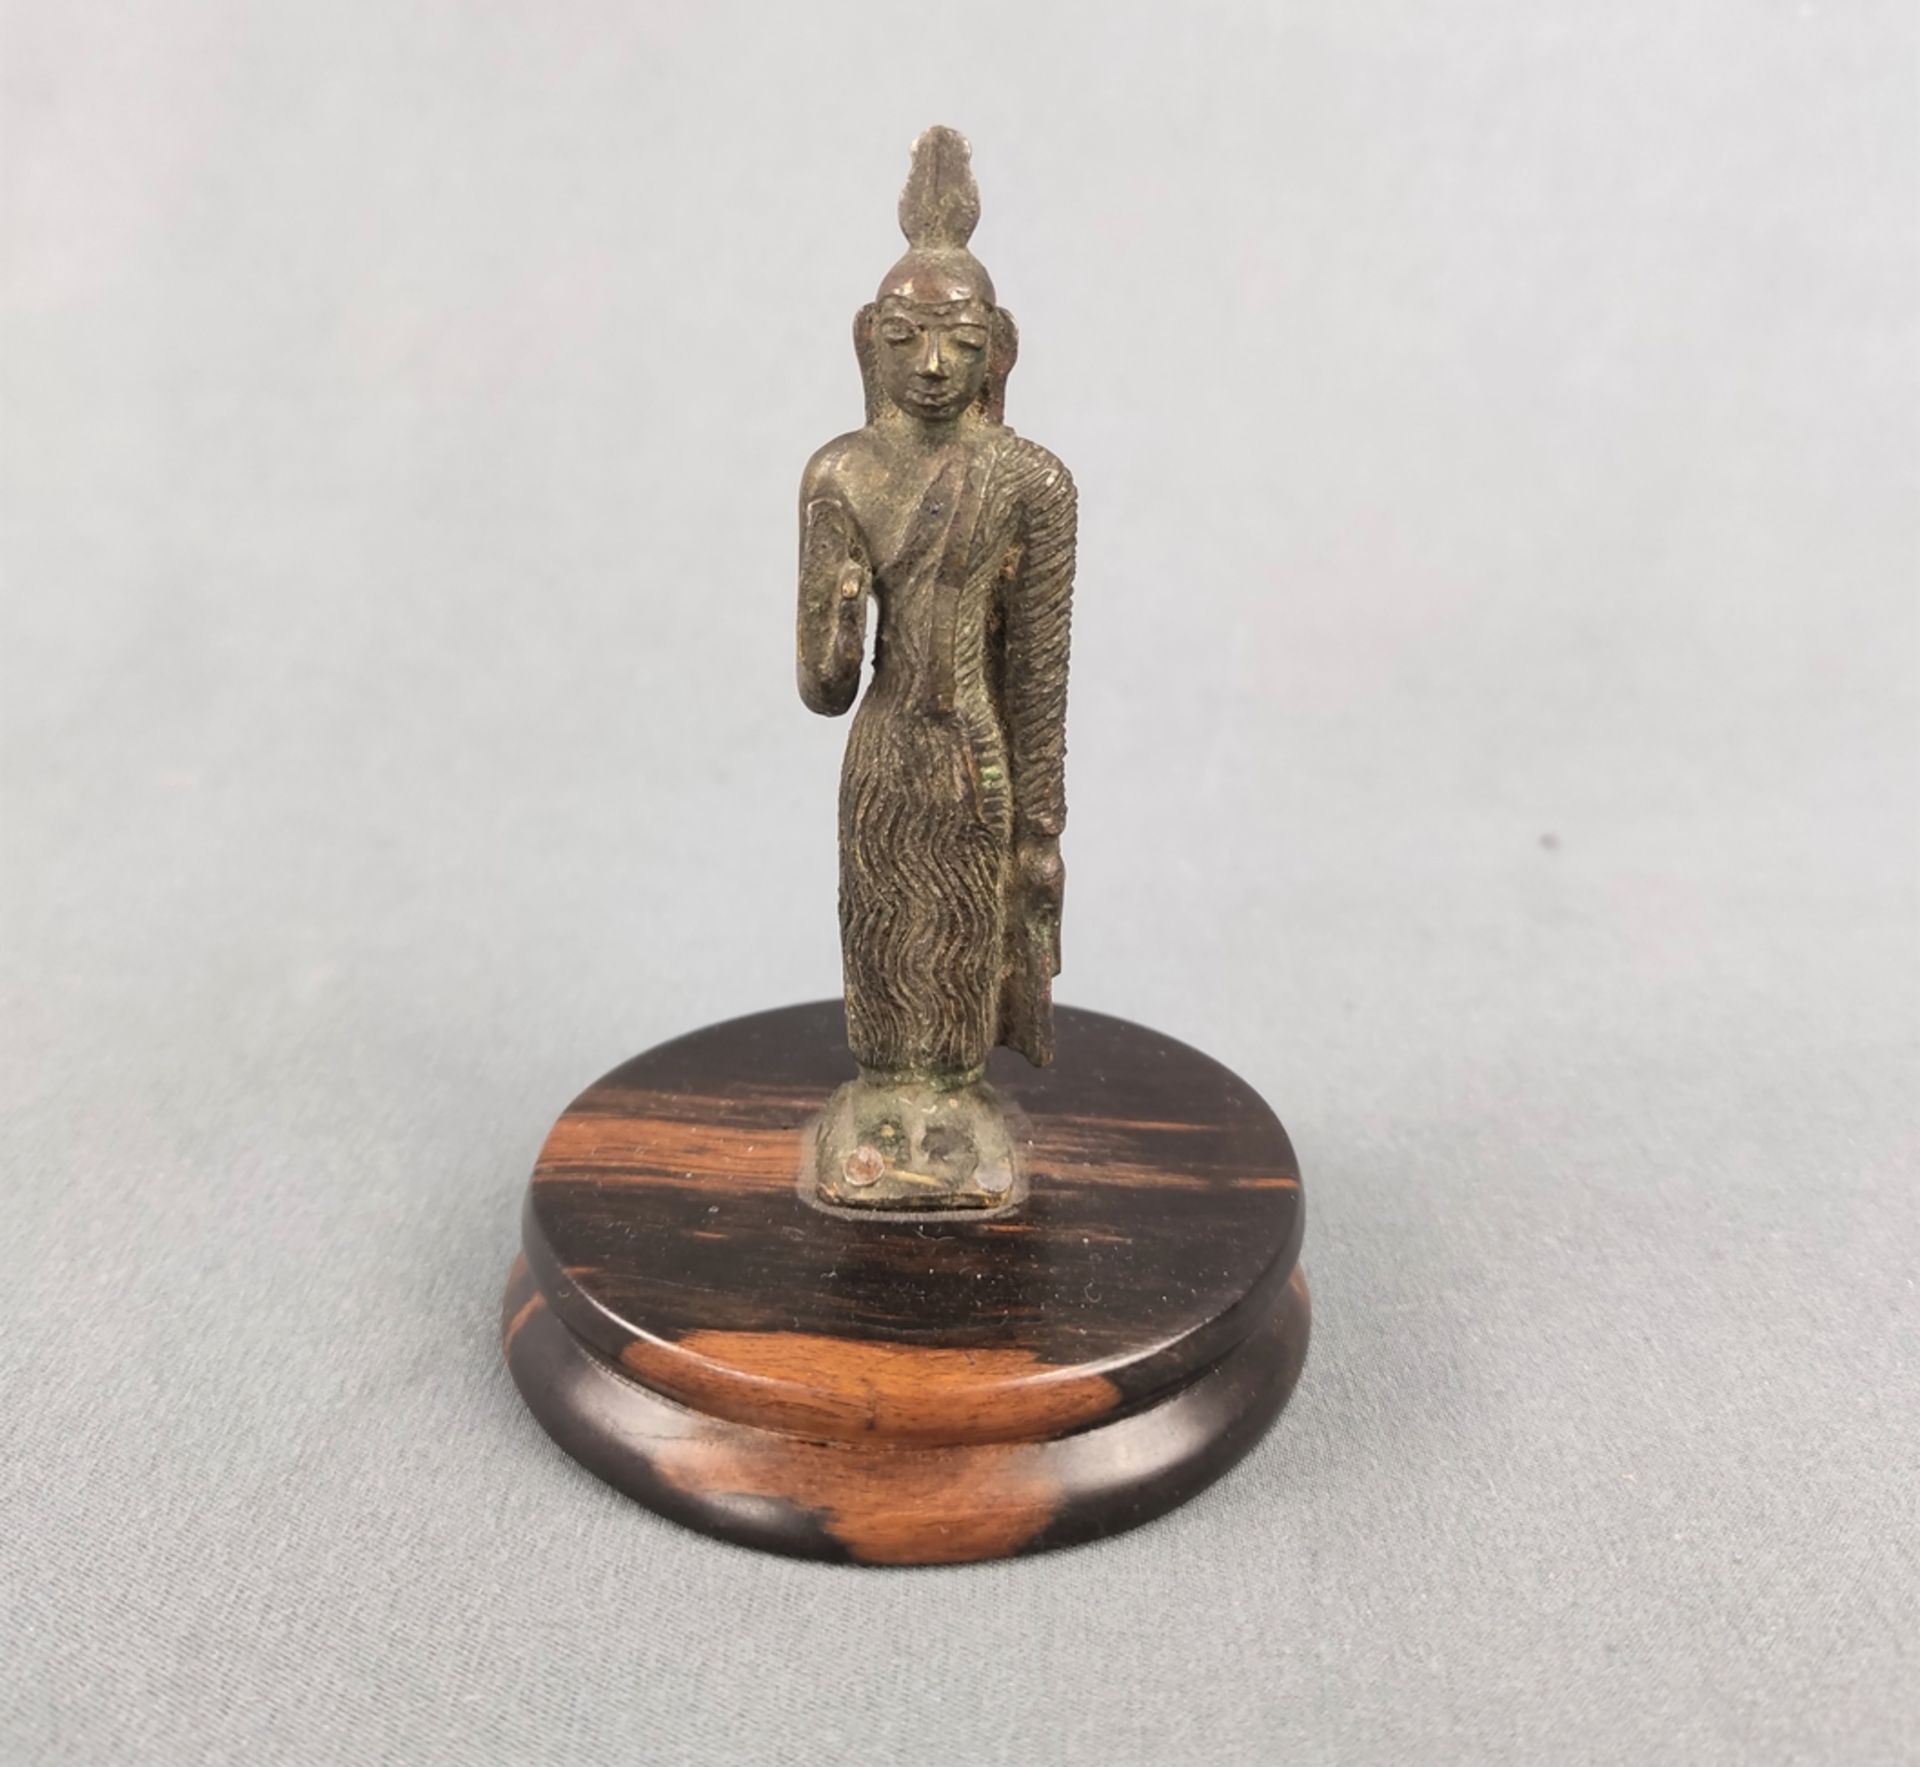 Small Buddha figure, probably Ceylon, probably 17th century, bronze on small round base, height 10.